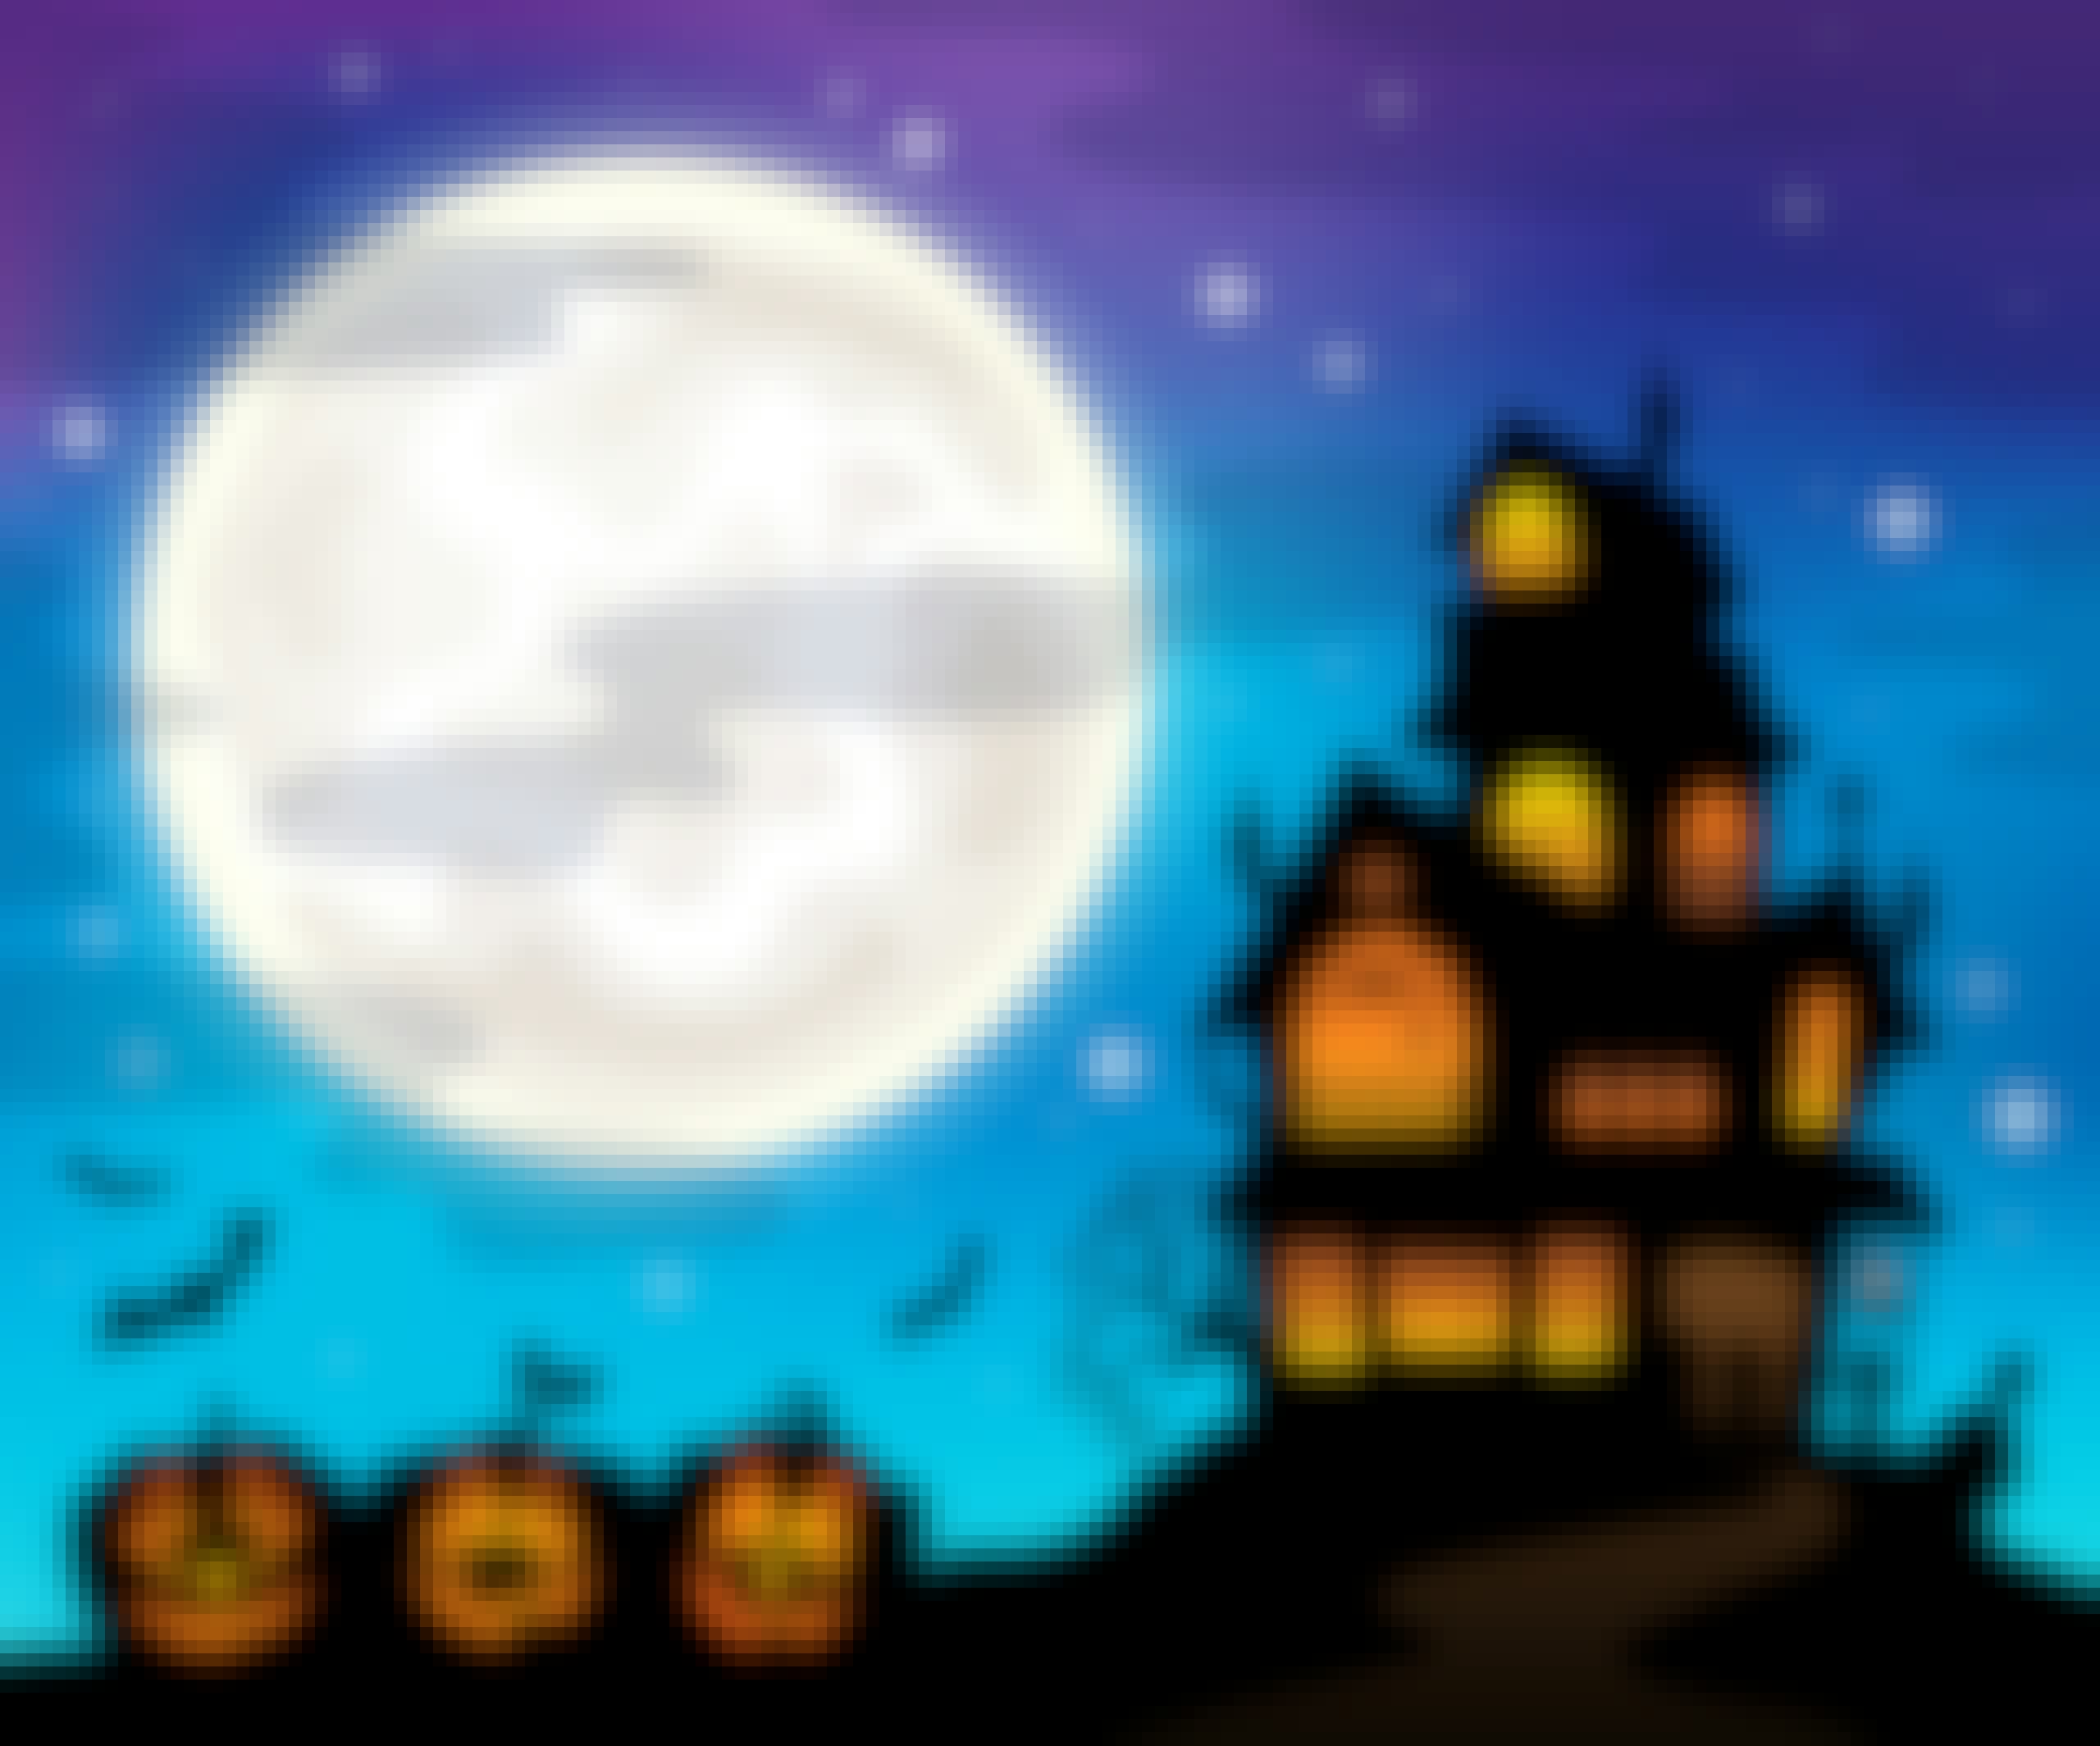 Haunted house silhouette theme image 6